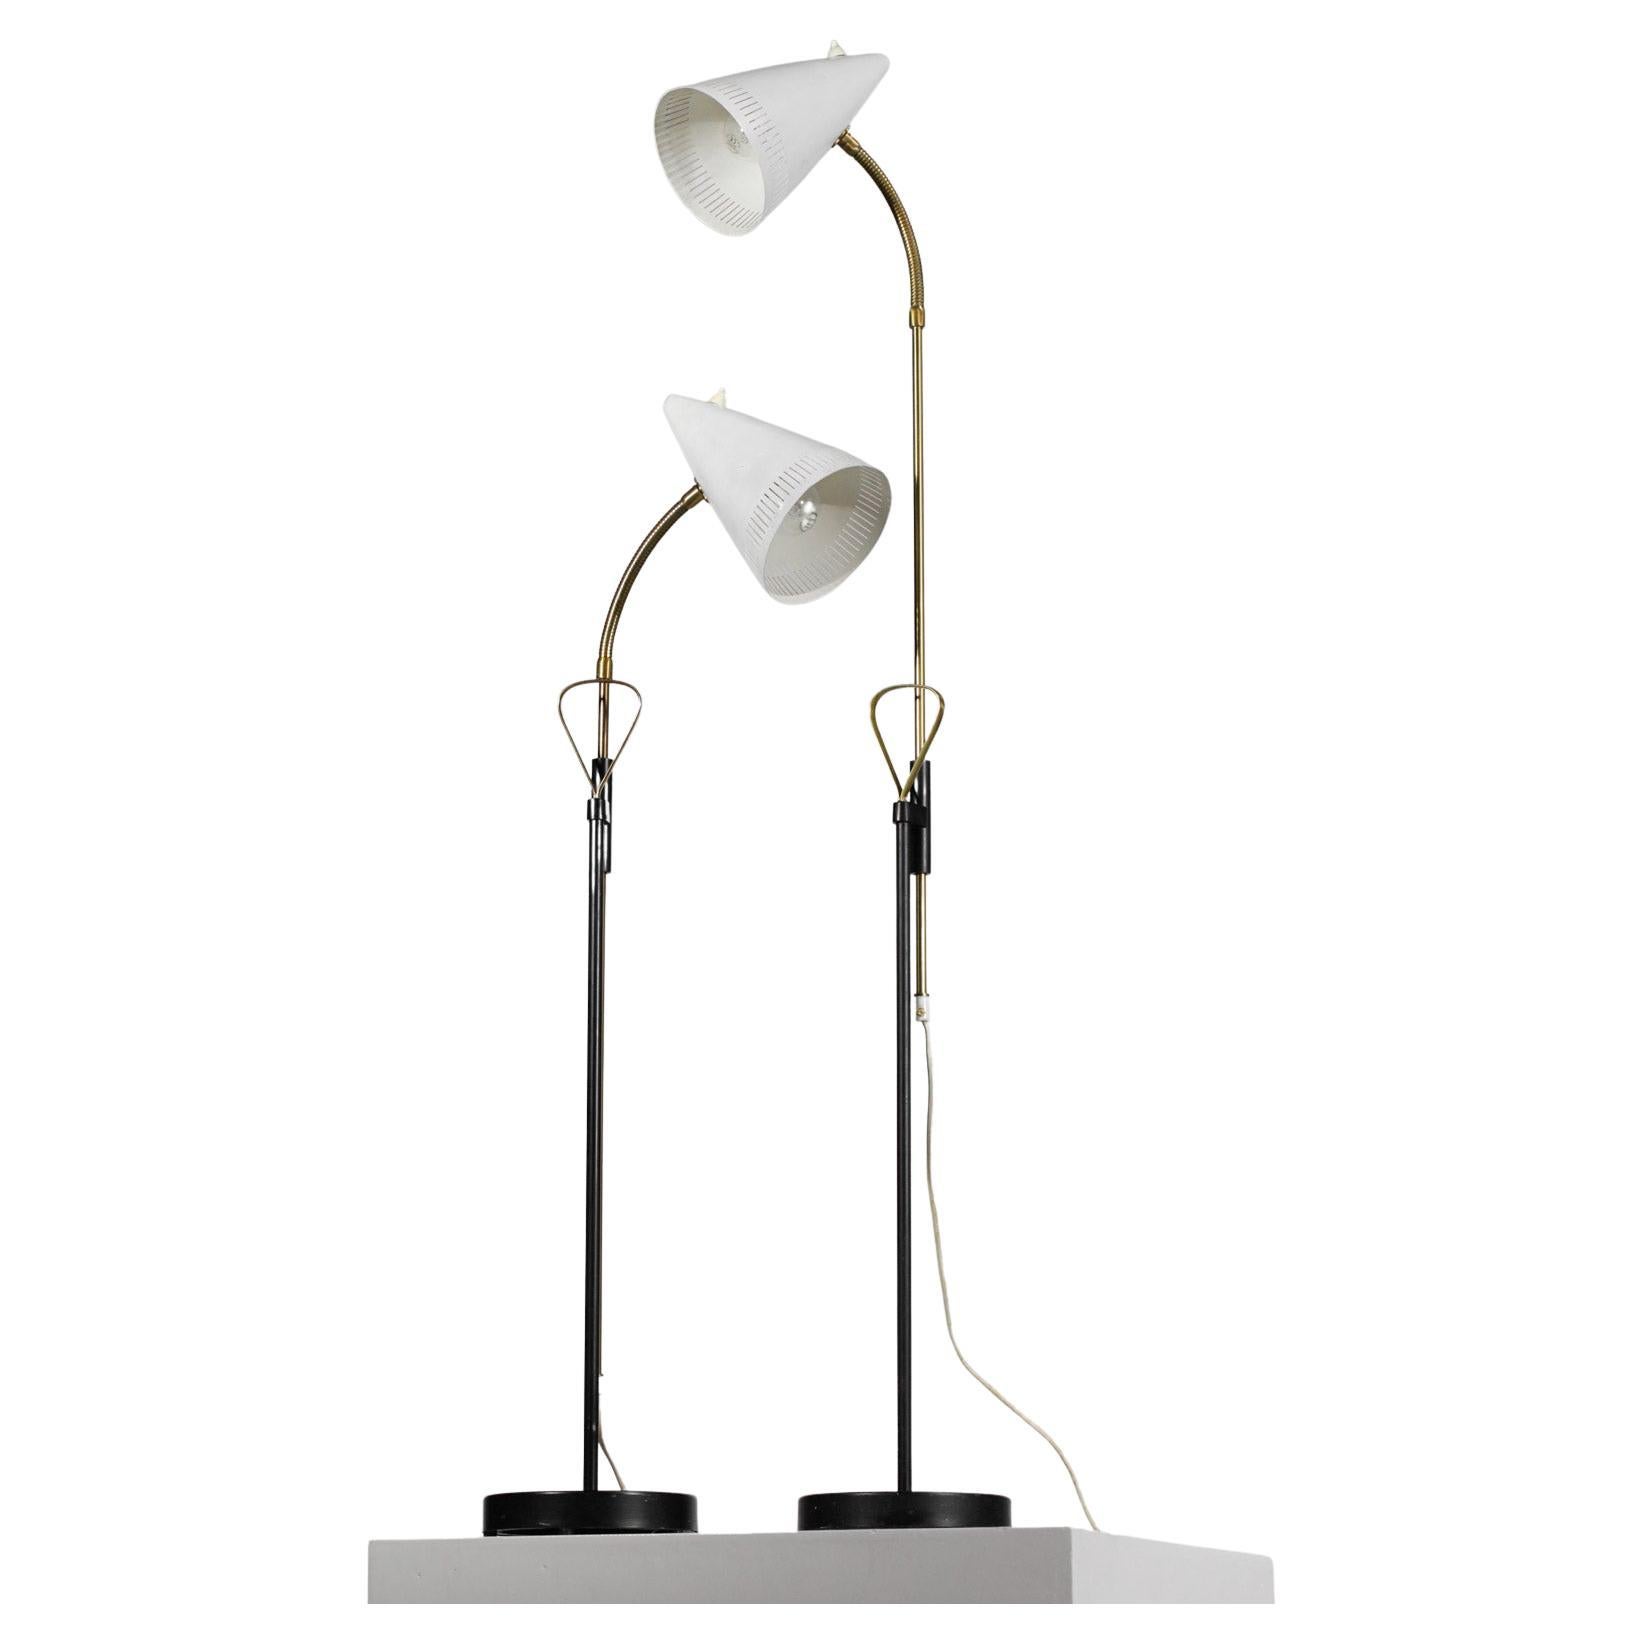 Pair of Scandinavian floor lamps by Swedish designer Falkenbergs Belysning from the 60s. Solid brass retractable and swivelling main stem, black and white lacquered metal base and shade, brass handle. Very nice vintage condition, original paint.